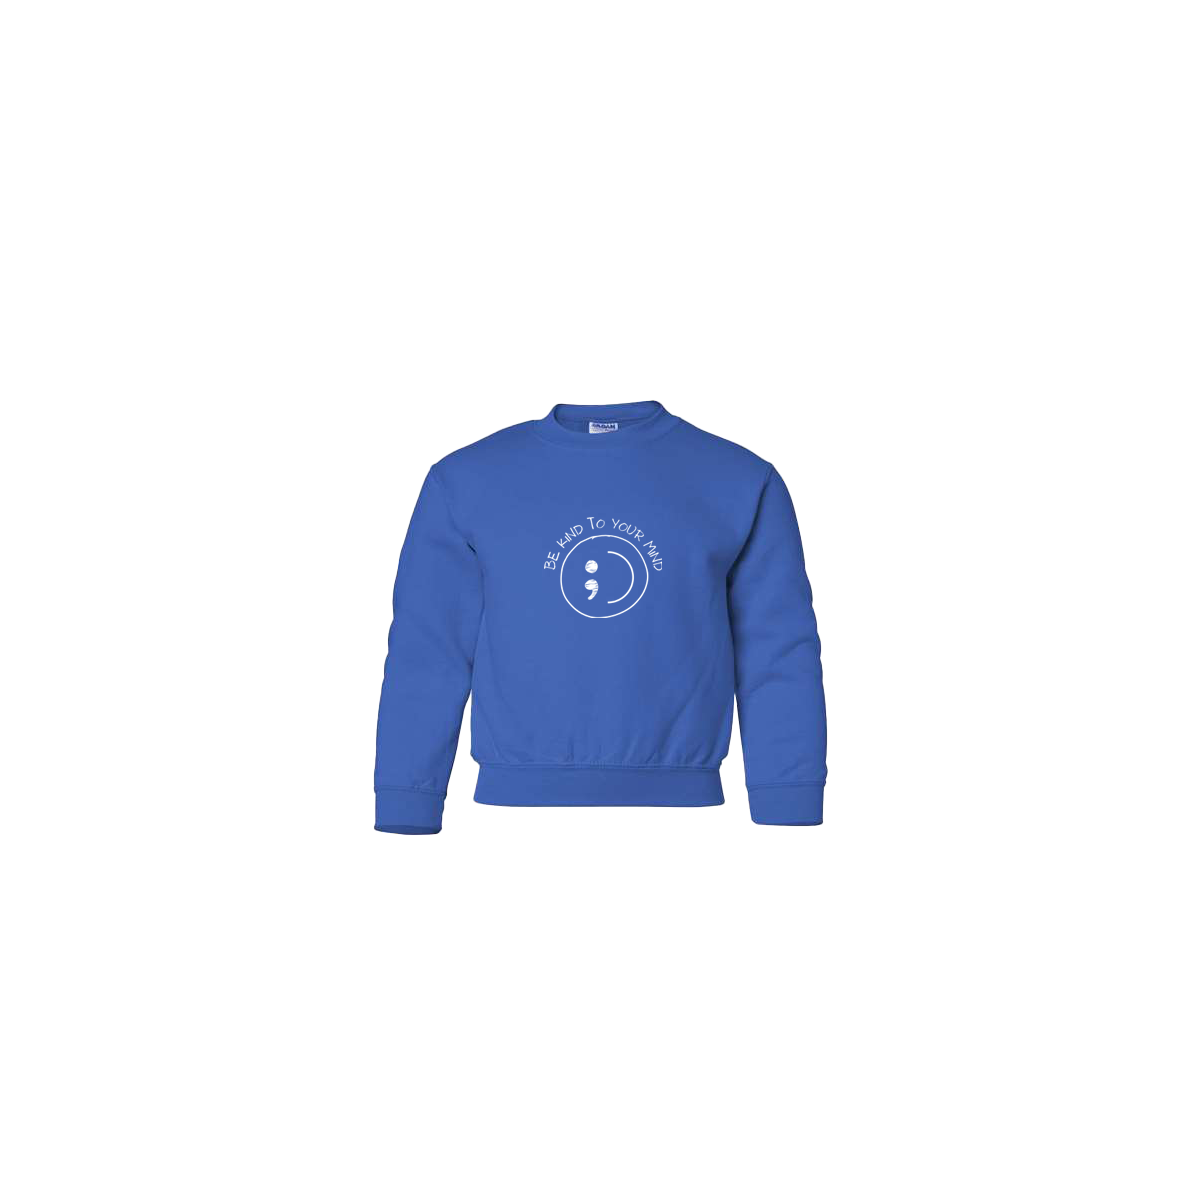 Be Kind To Your Mind Smiley Face Embroidered Royal Blue Youth Crewneck